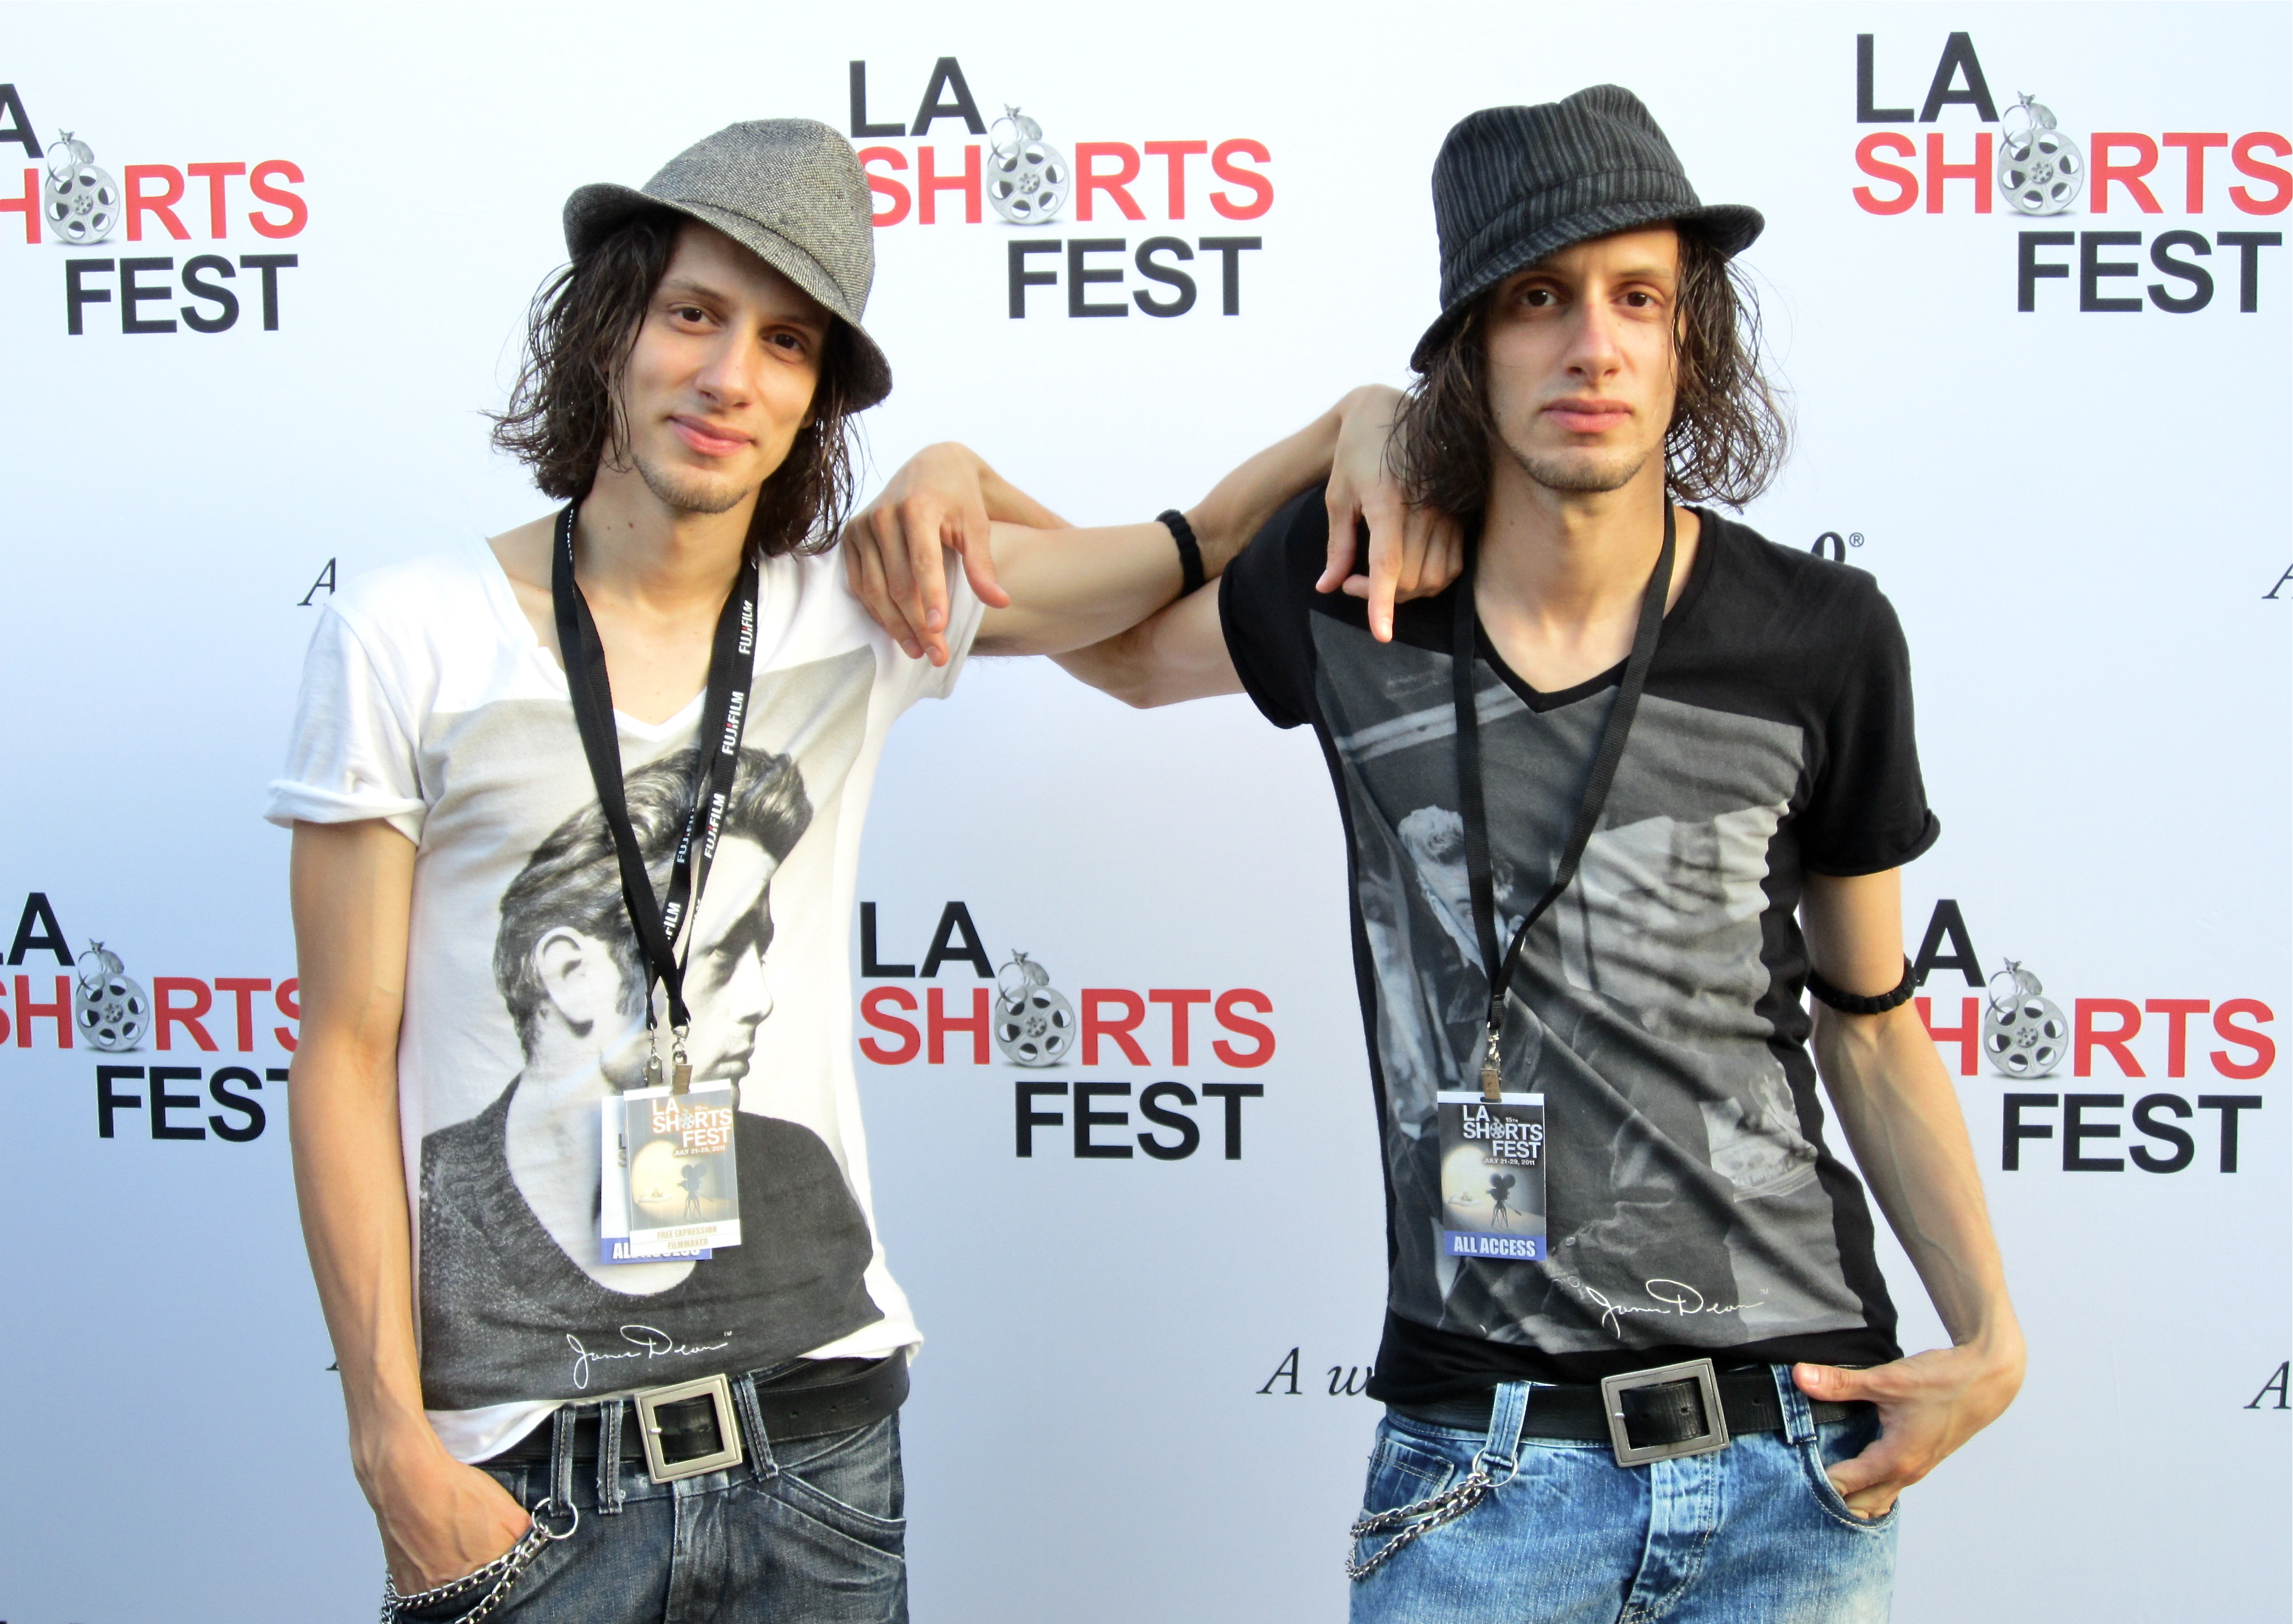 Facundo Lombard and Martín Lombard at LA Shorts Fest. Screening of Free Expression (2012)